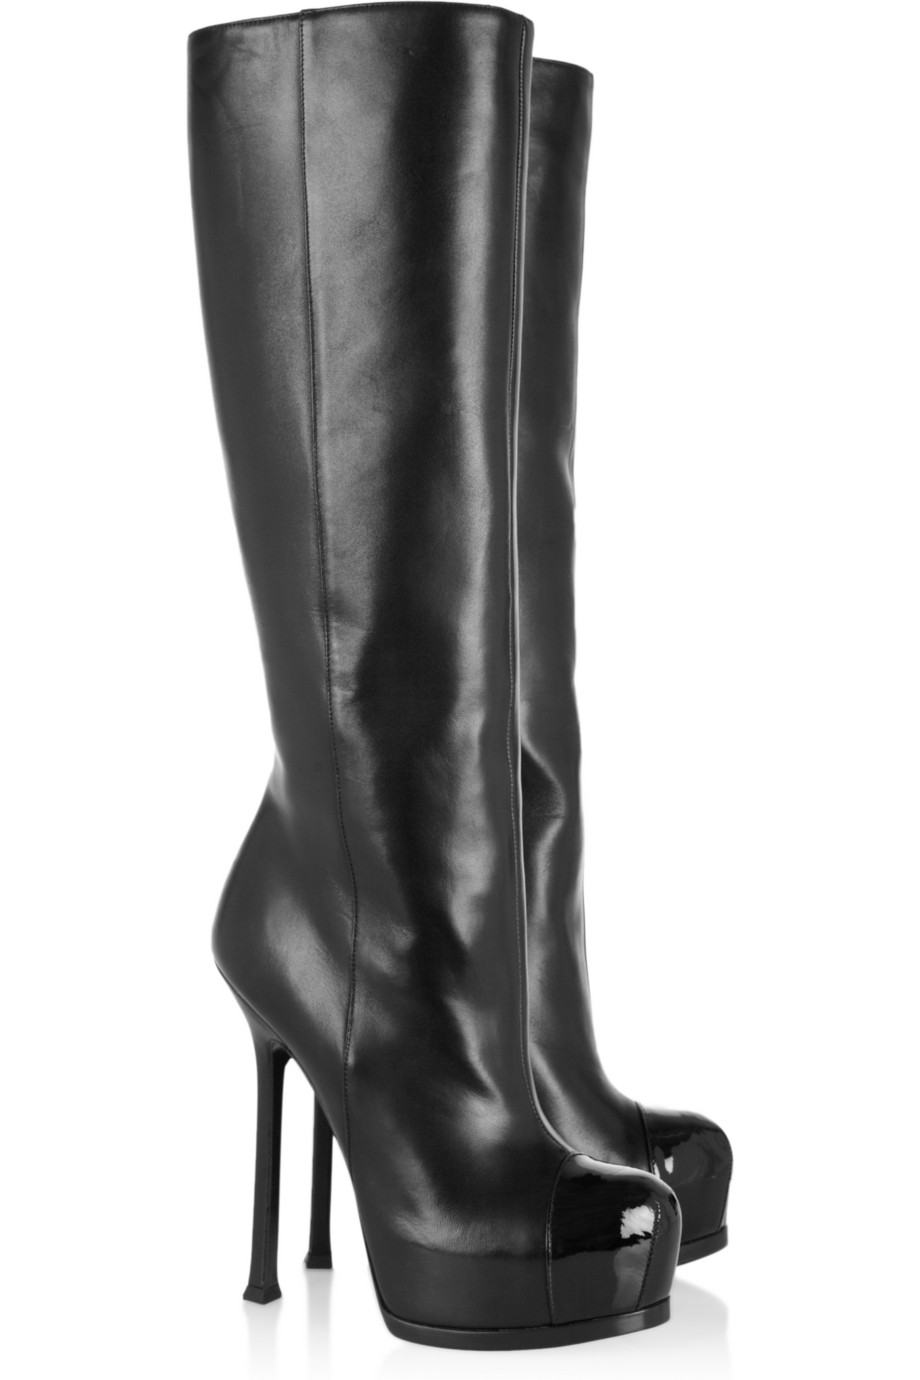 Lyst Saint Laurent Tribtoo Leather And Patent Knee Boots In Black 